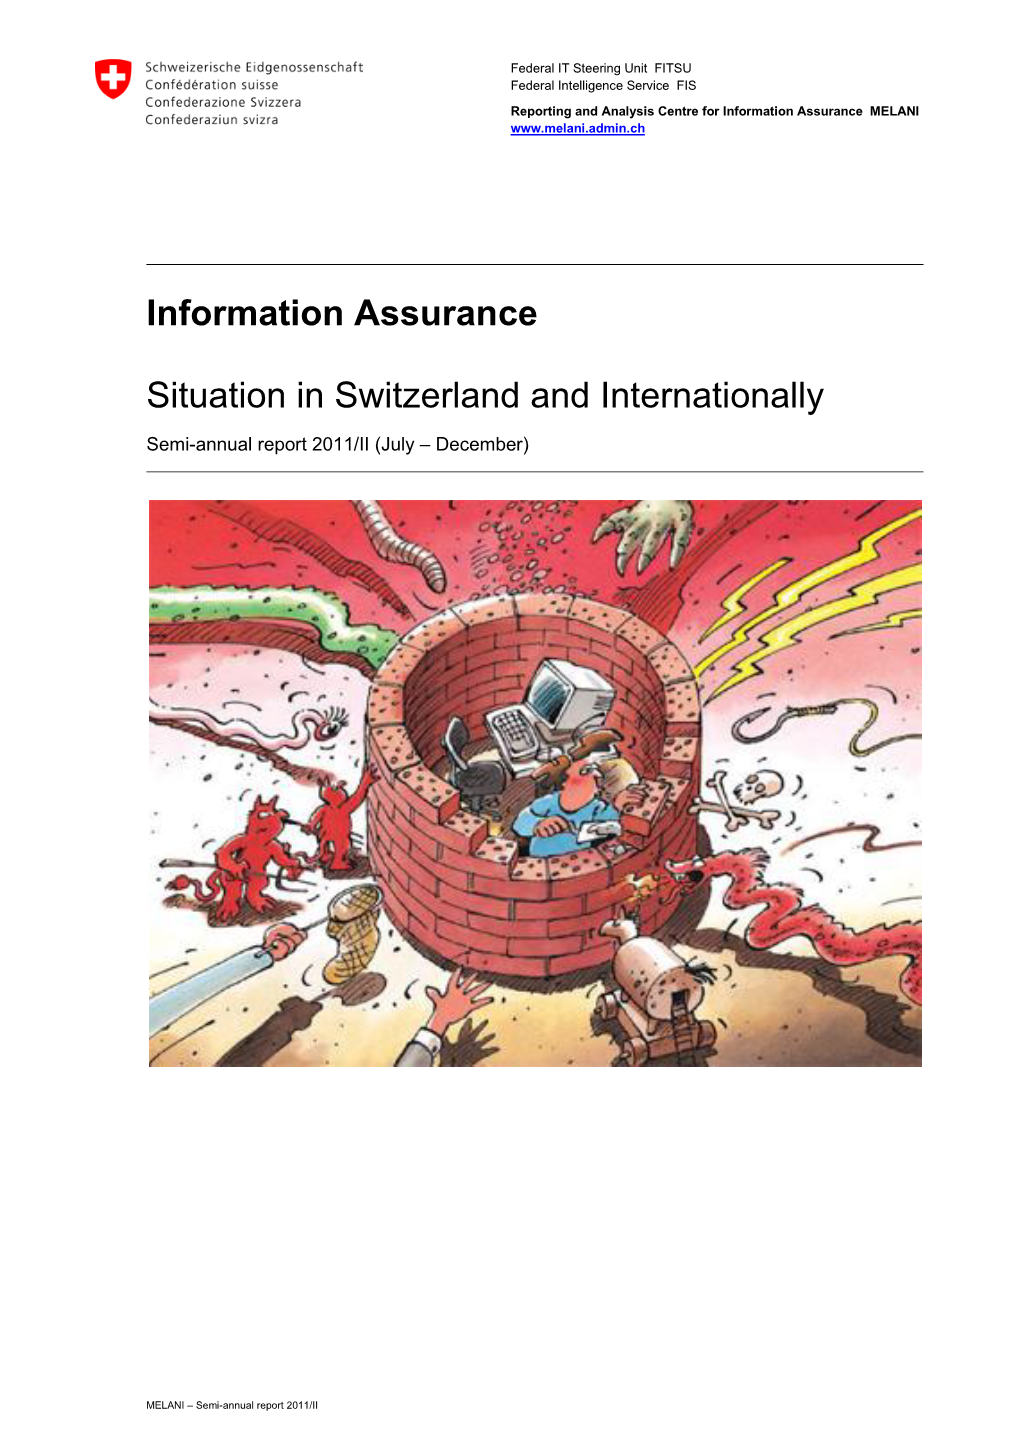 Information Assurance Situation in Switzerland and Internationally